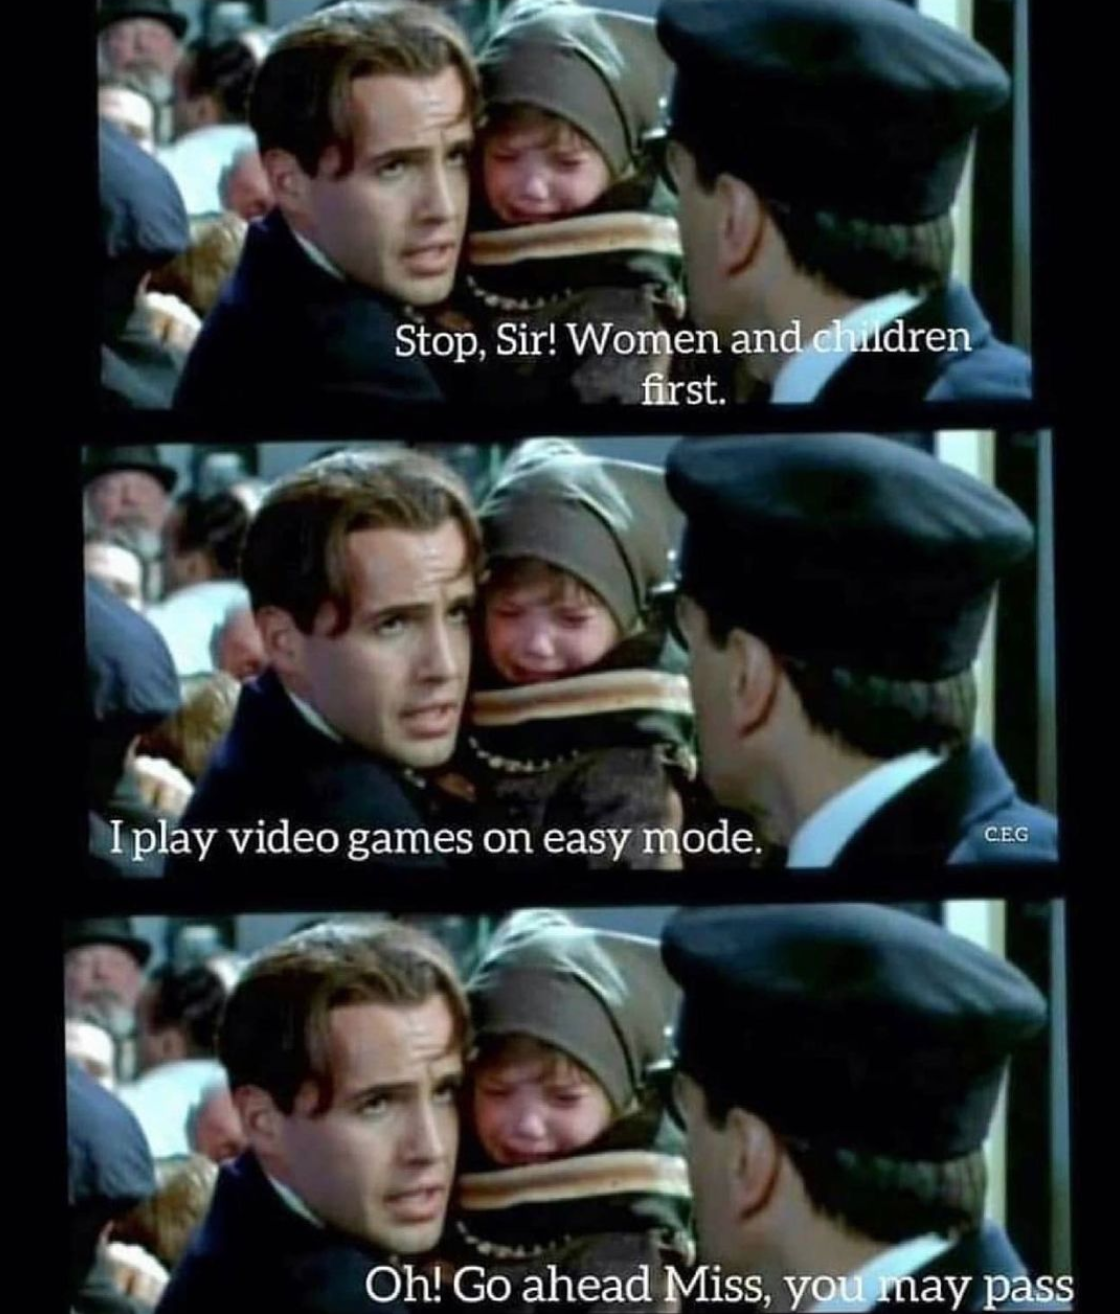 funny gaming memes - women and children first titanic - Stop, Sir! Women and children first. I play video games on easy mode. Ceg Oh! Go ahead Miss, you may pass